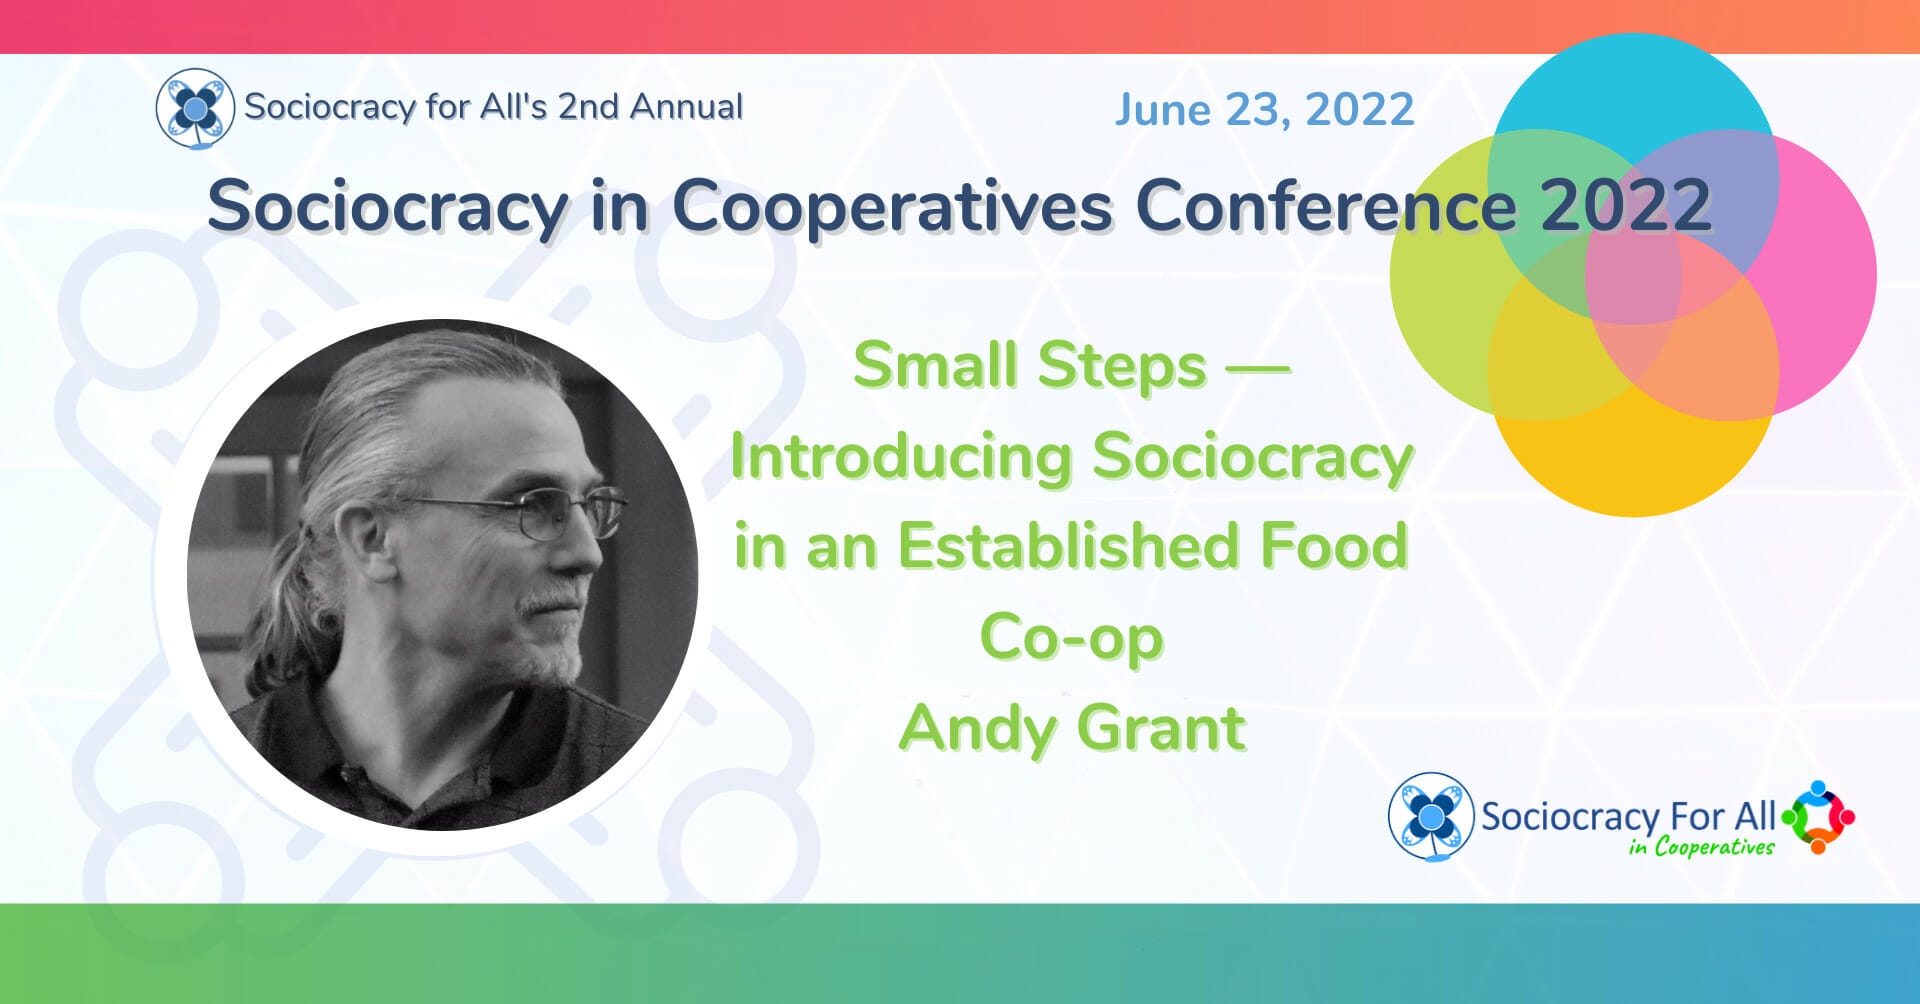 Small Steps — Introducing Sociocracy in an Established Food Co-op by Andy Grant